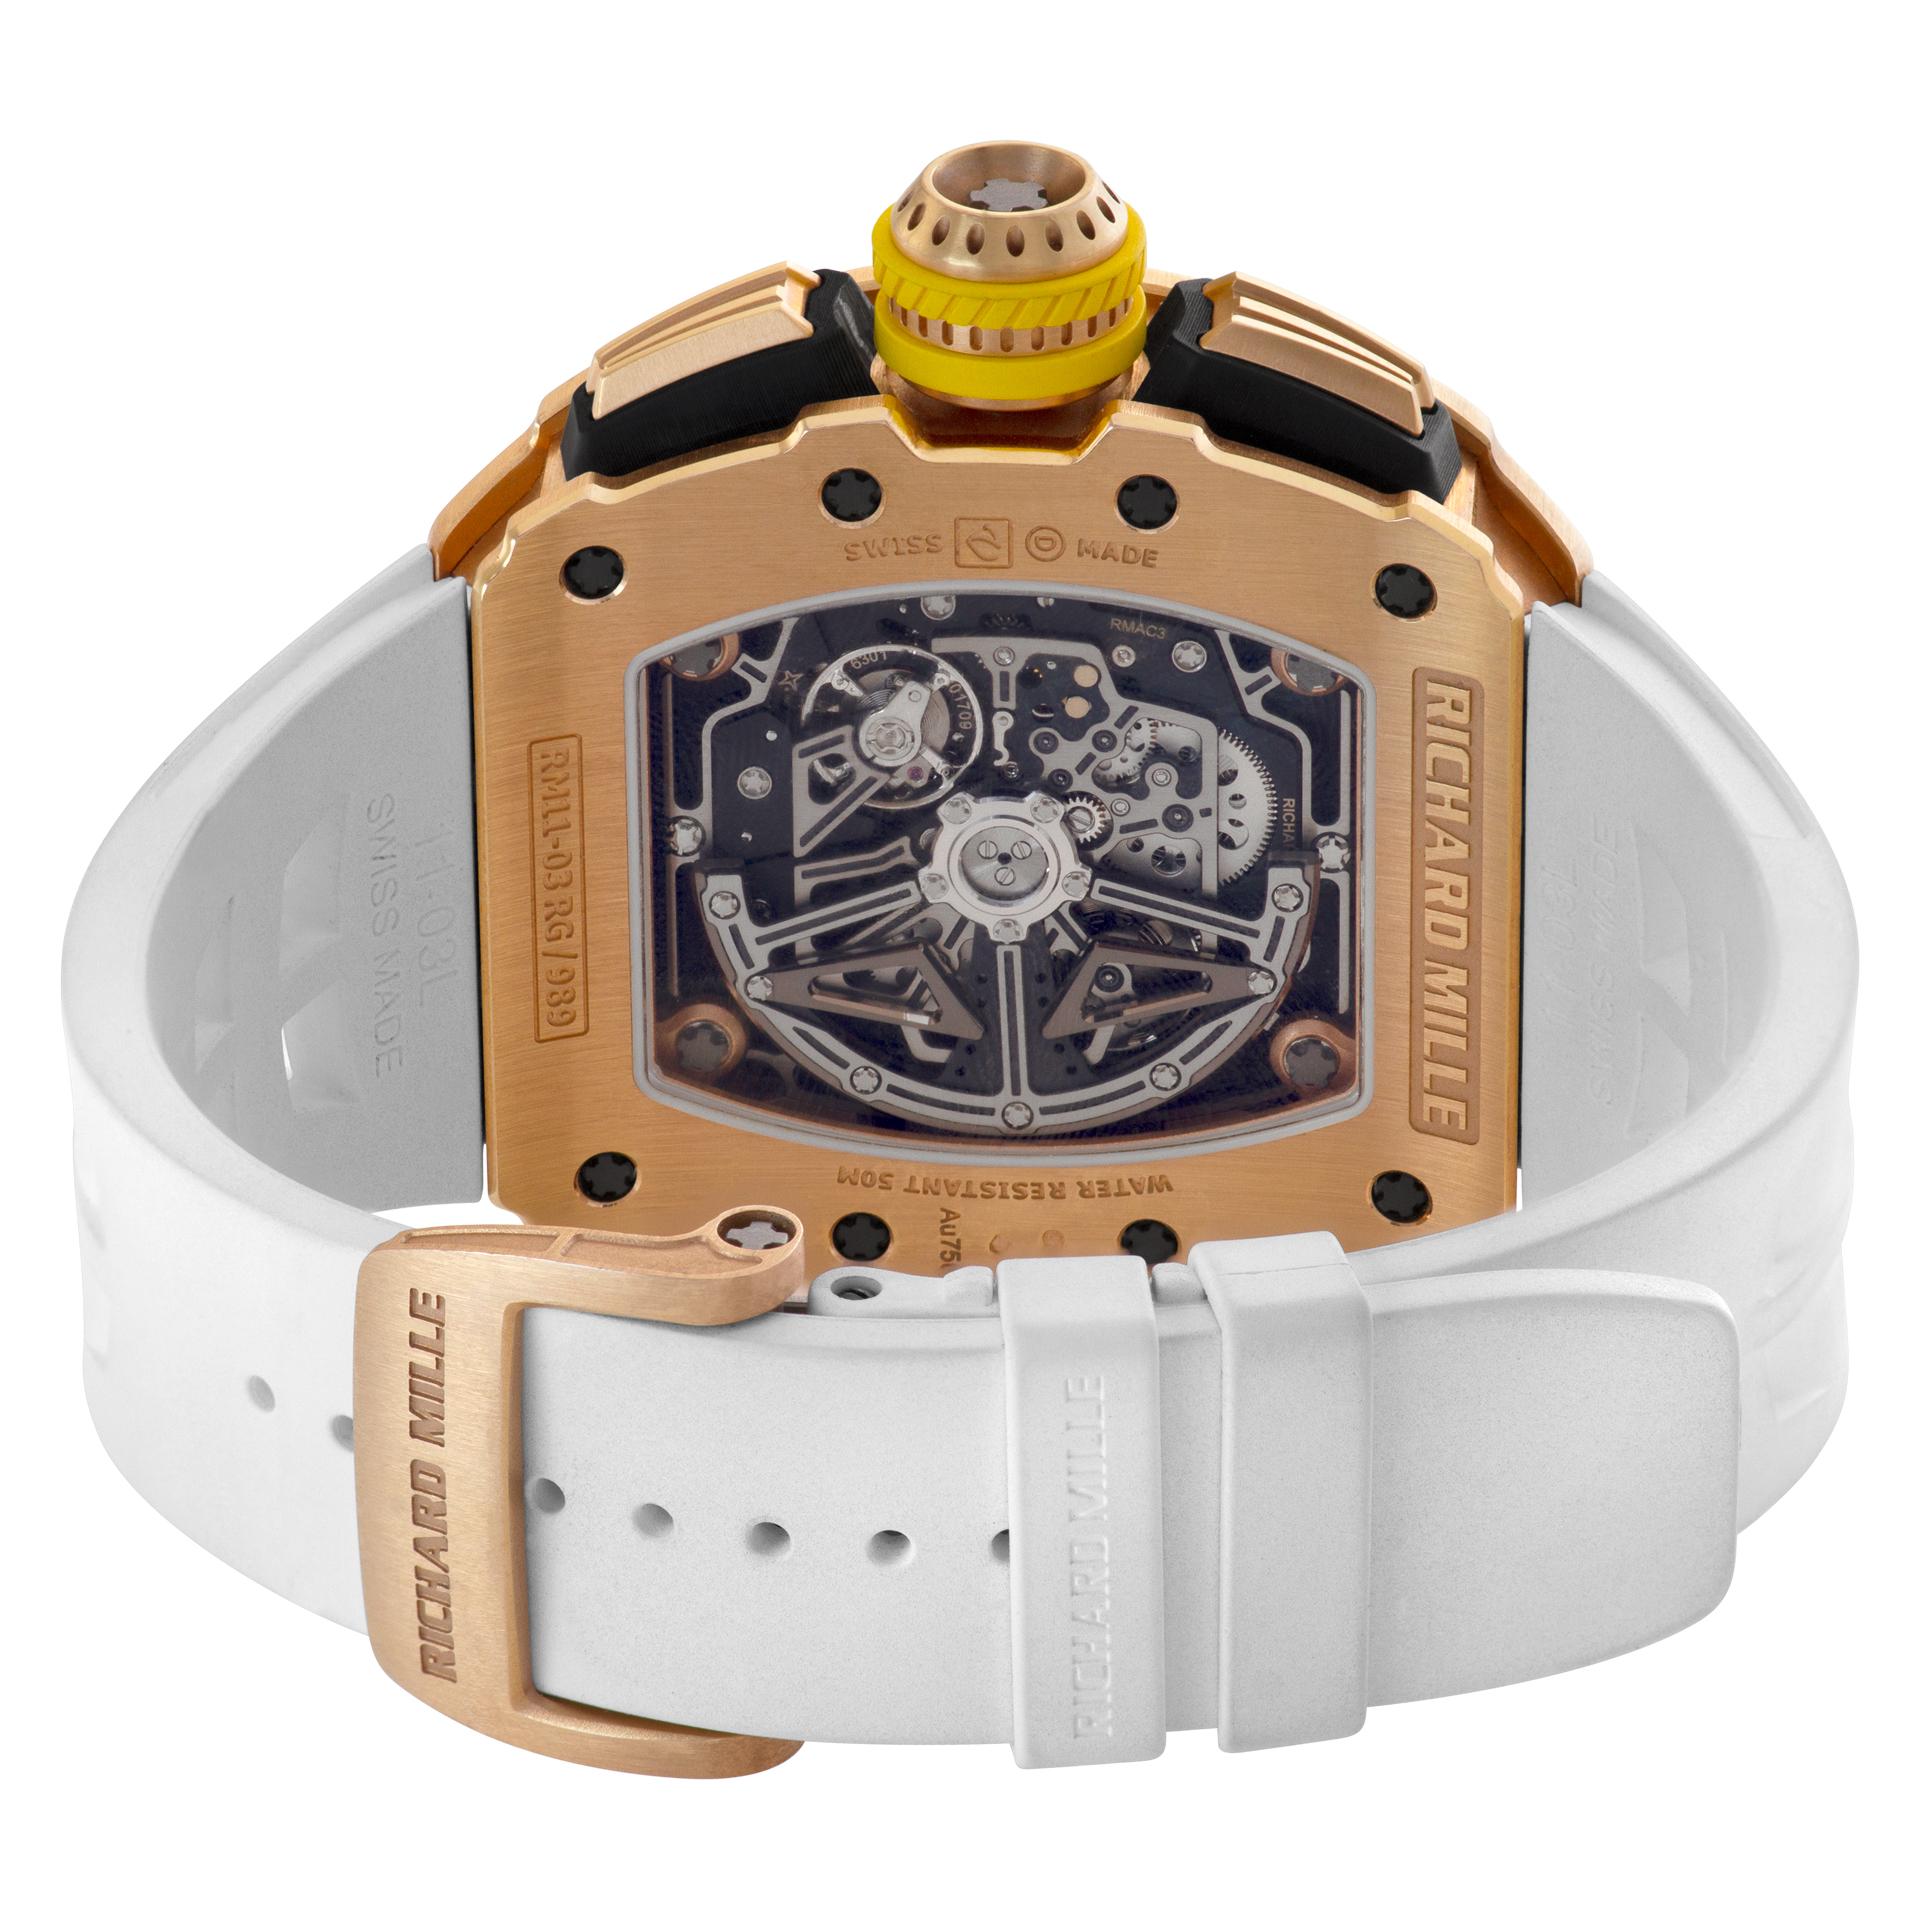 Richard Mille Flyback Chronograph RM11-03 RG. New 2